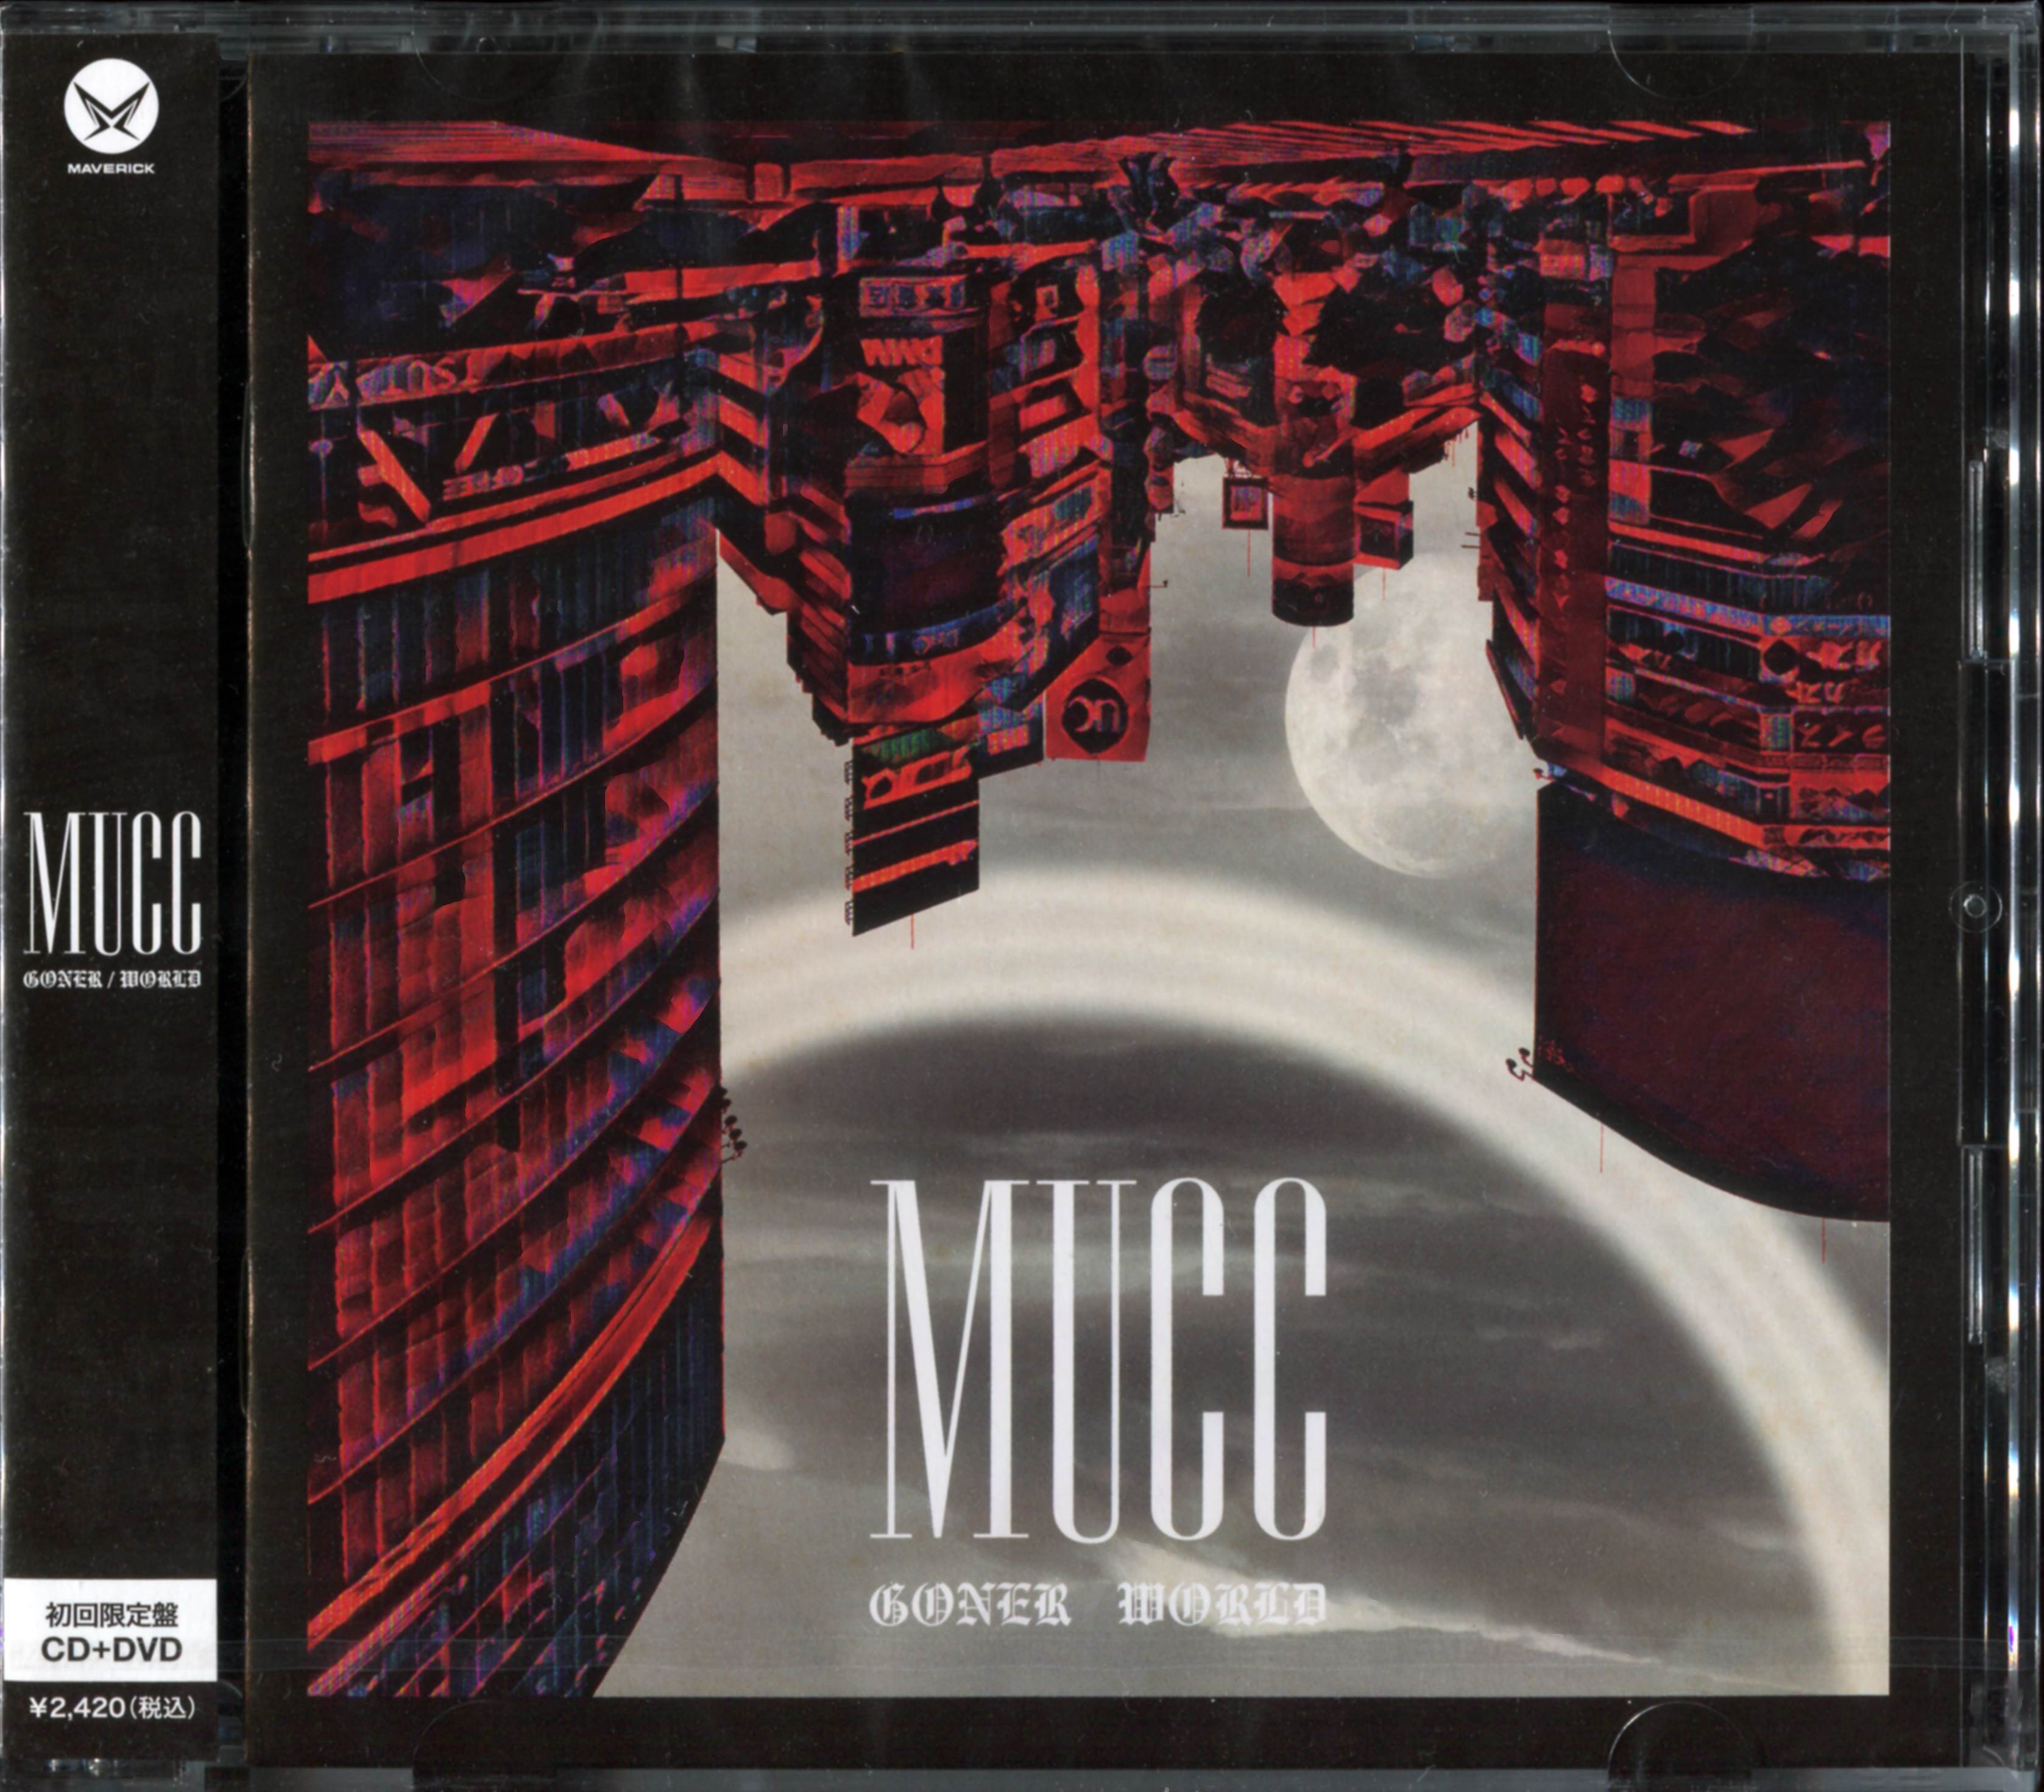 MUCC – GONER/WORLD [FLAC + MP3 320 + DVD ISO] [2021.11.05]